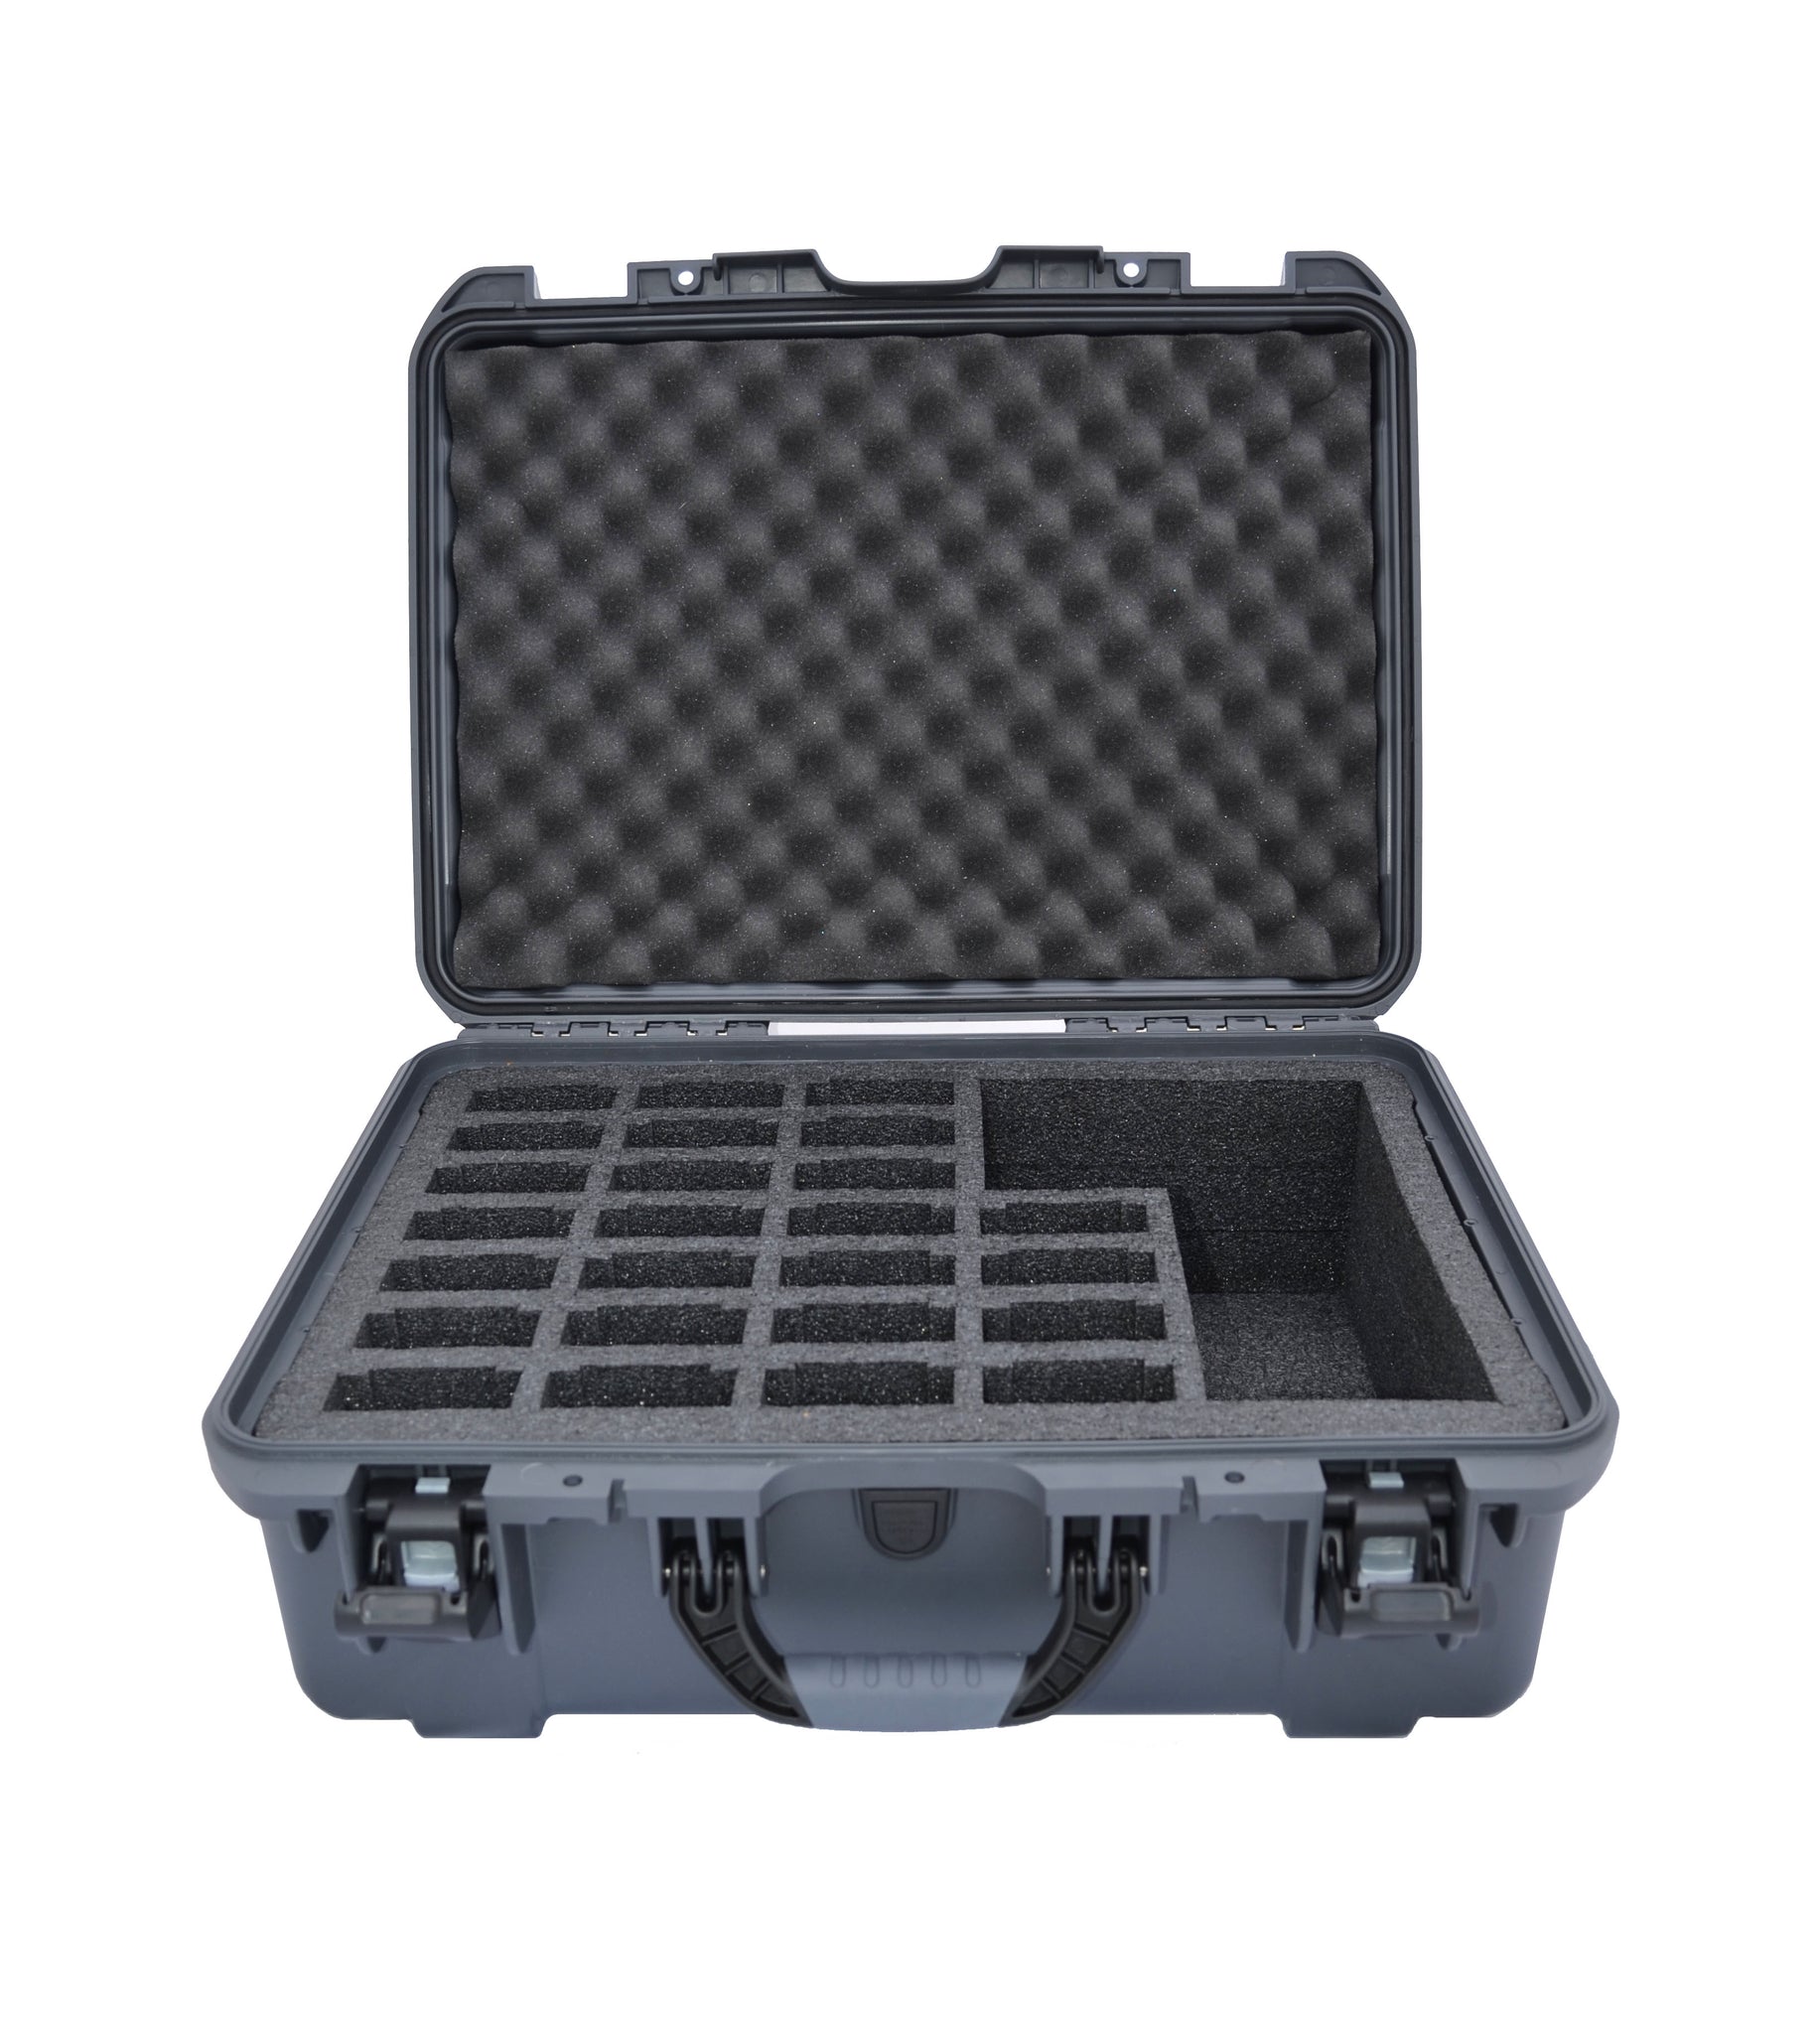 CAS-25 Carrying Case for 25 R-120 Enersound Receivers